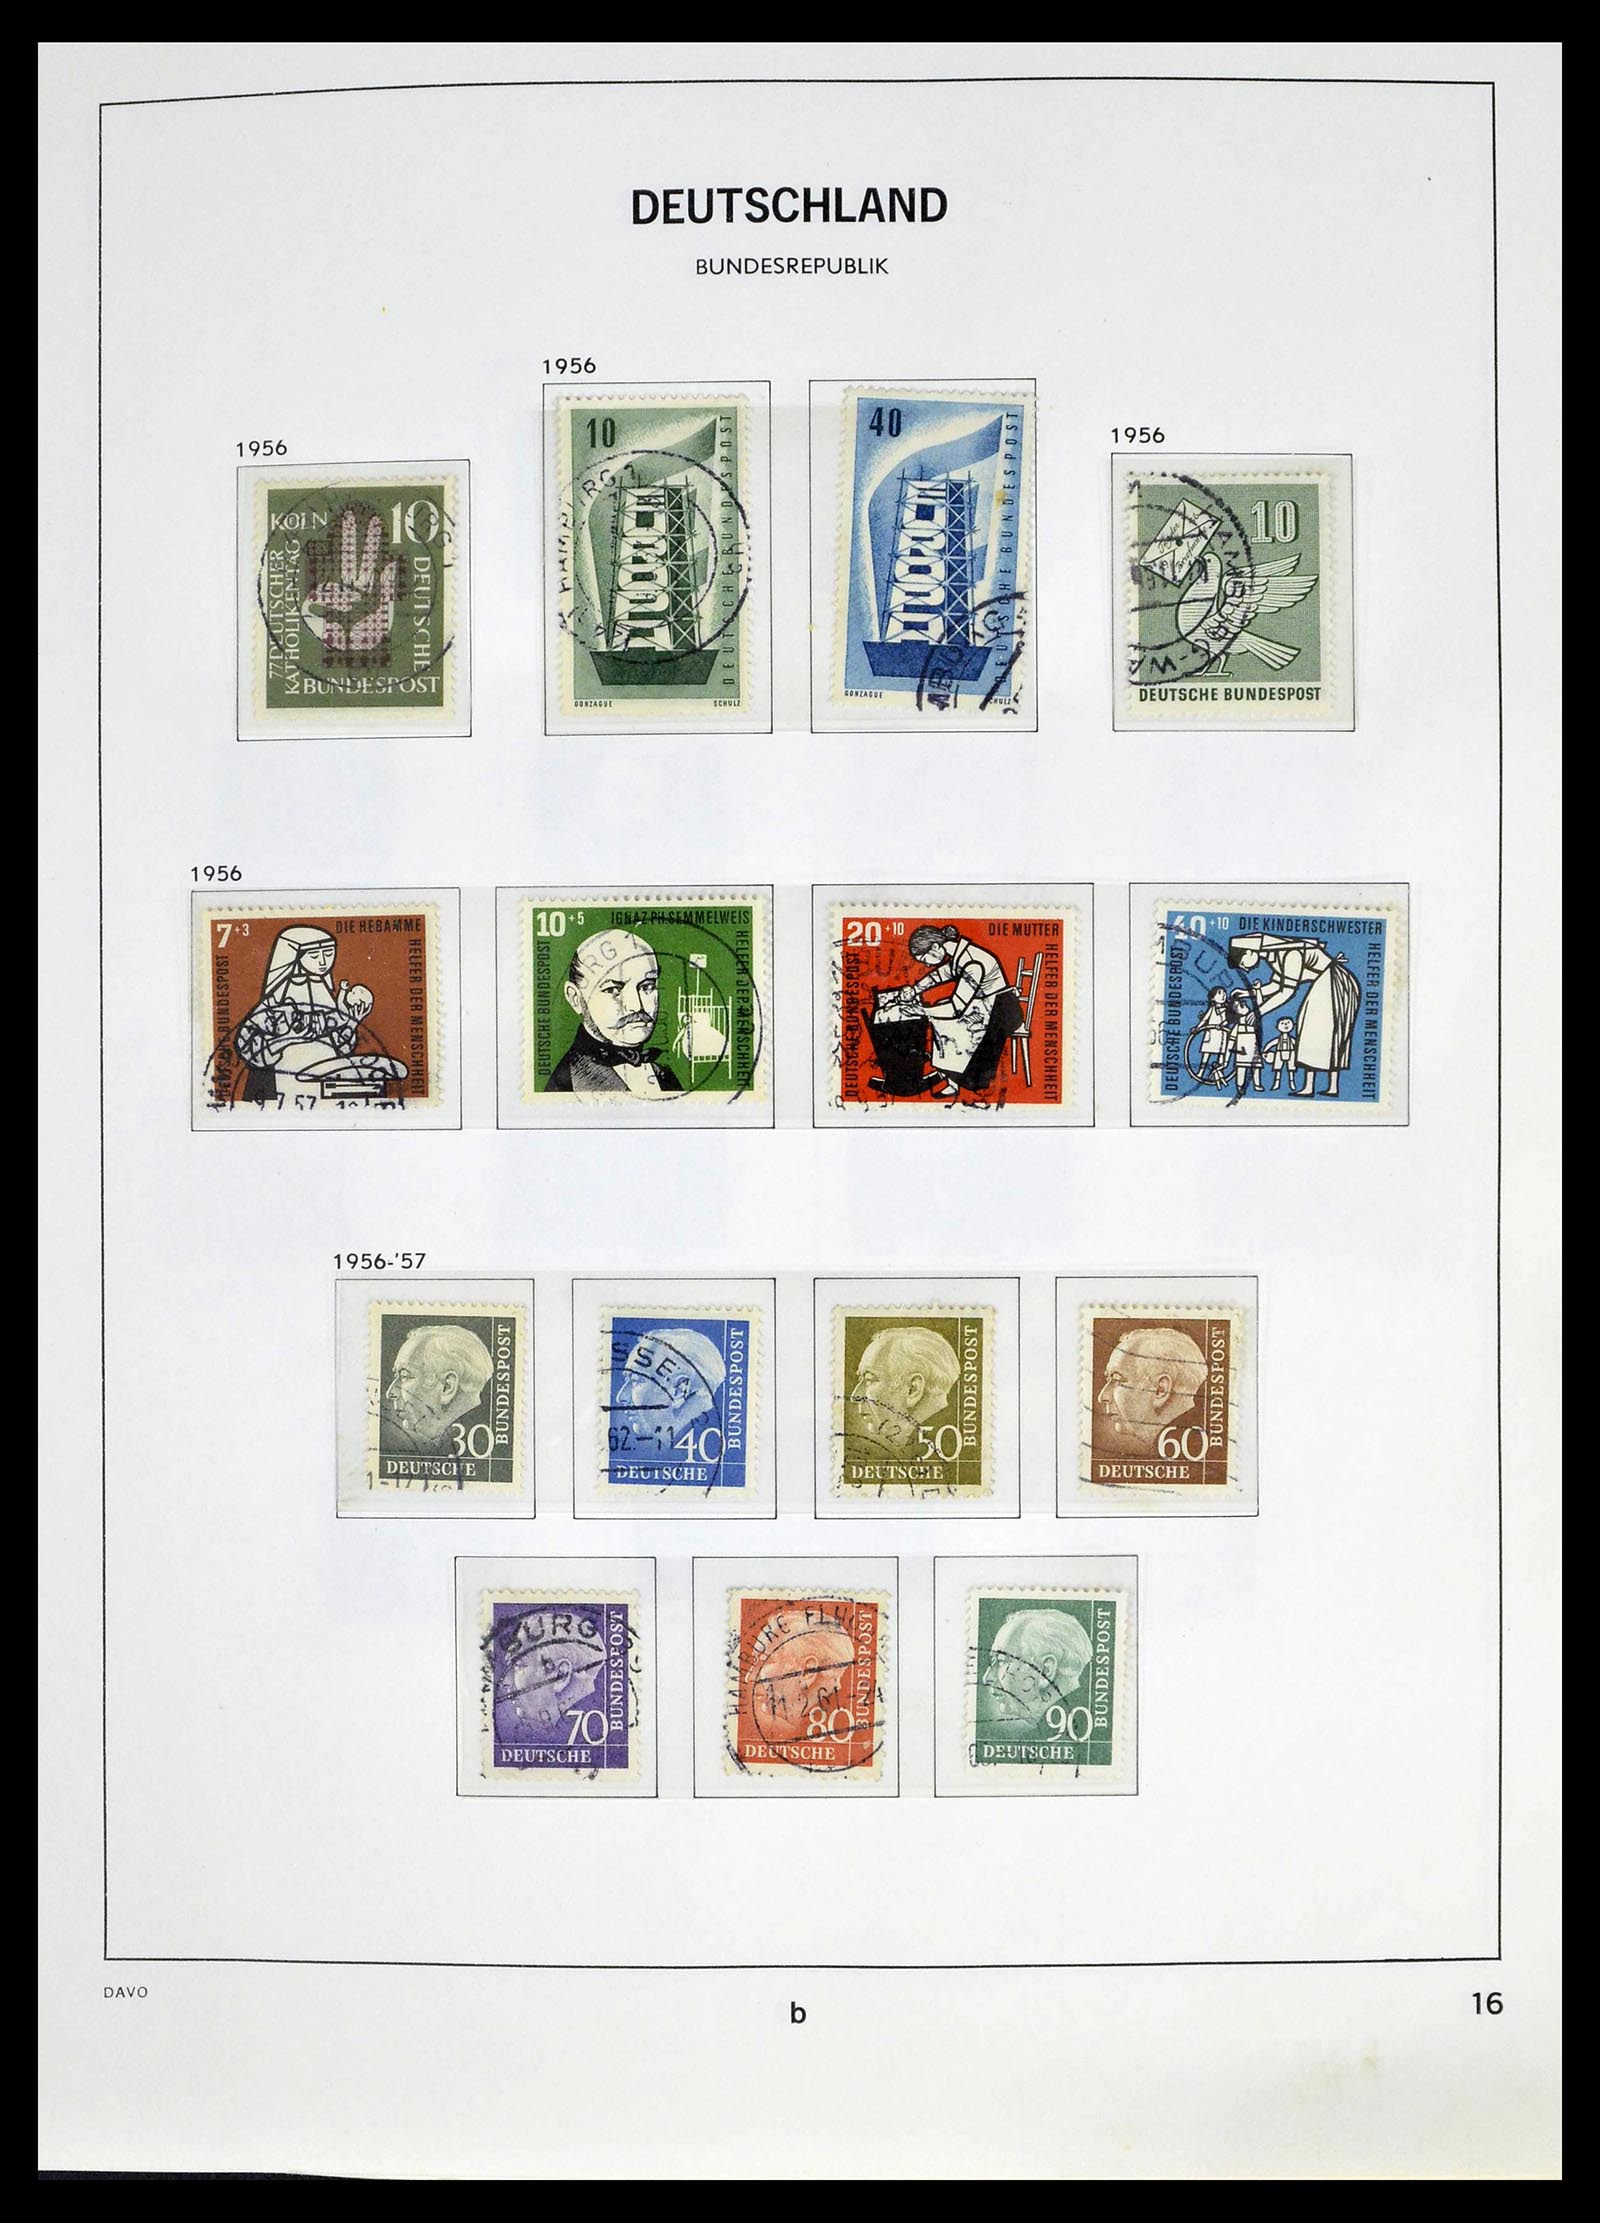 39326 0010 - Stamp collection 39326 Bundespost 1949-2003.